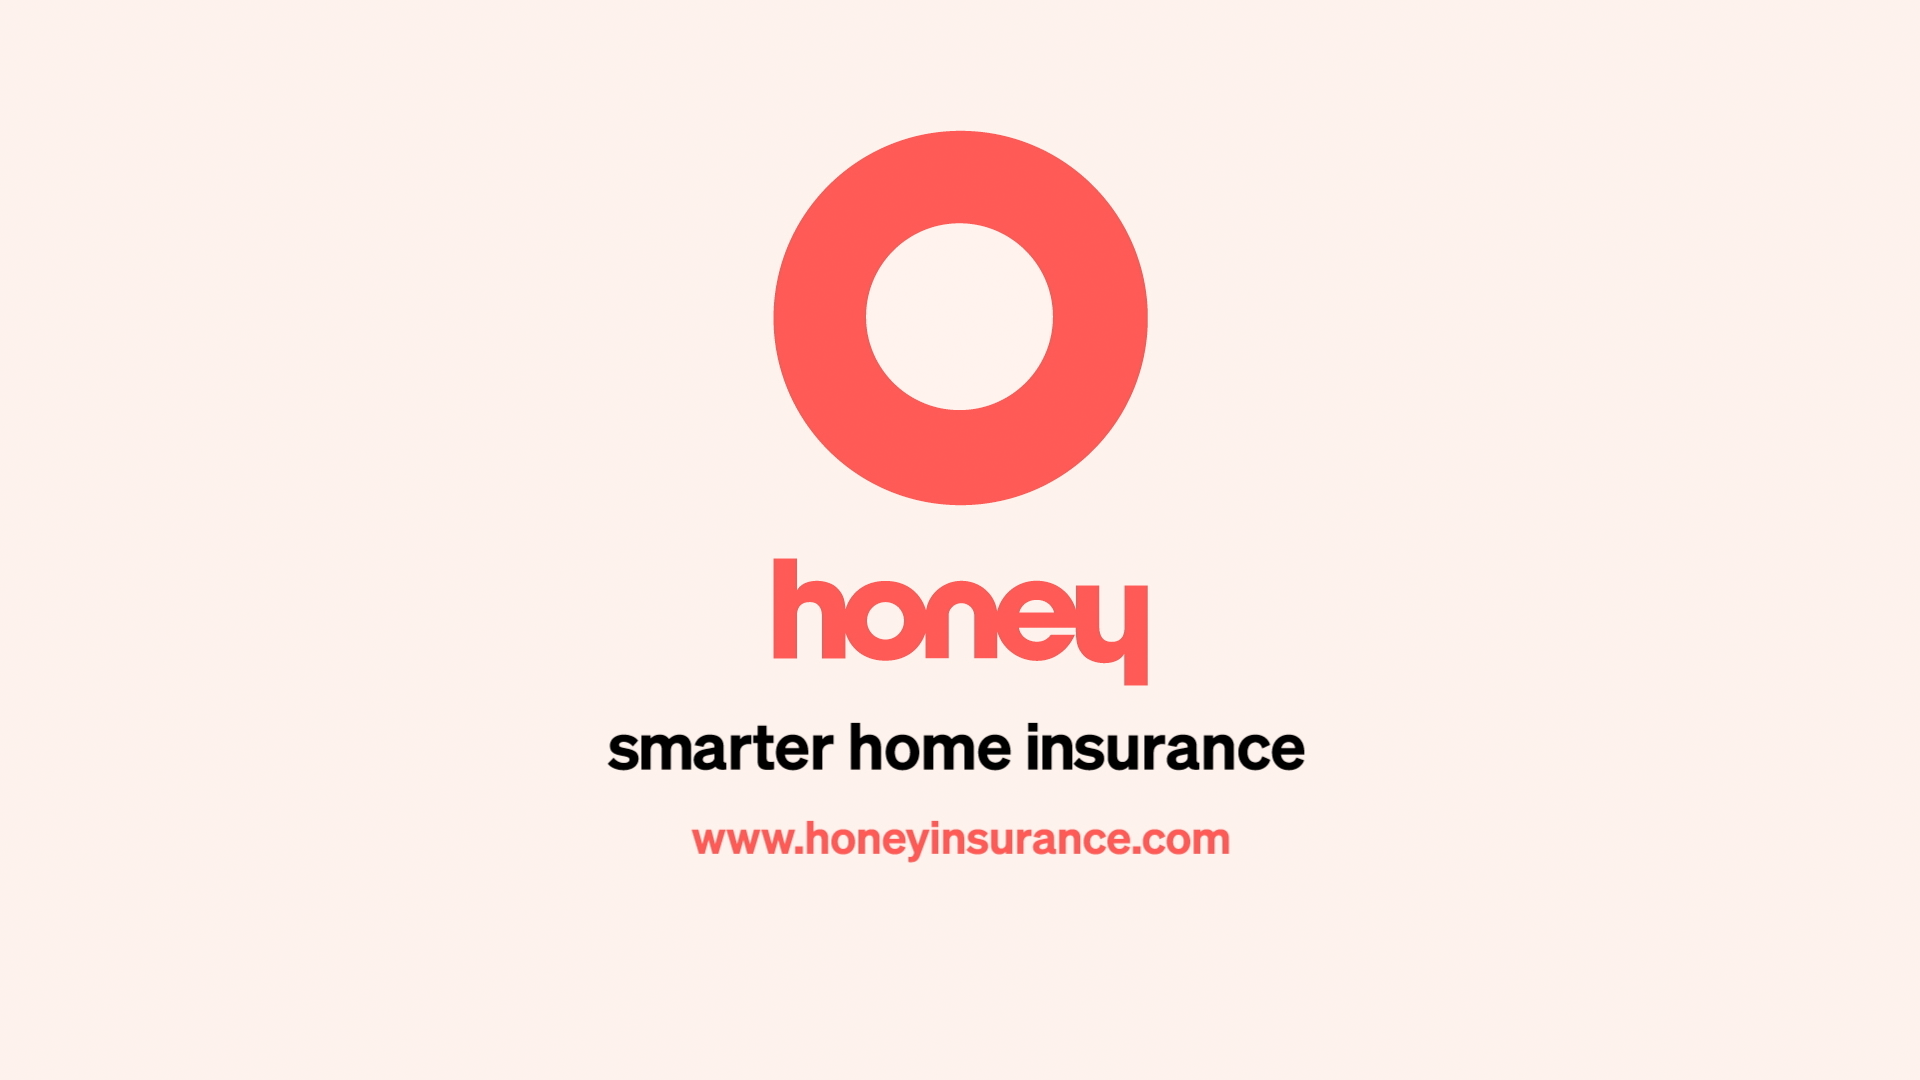 Honey_insurance_01_0005_Layer-7.png